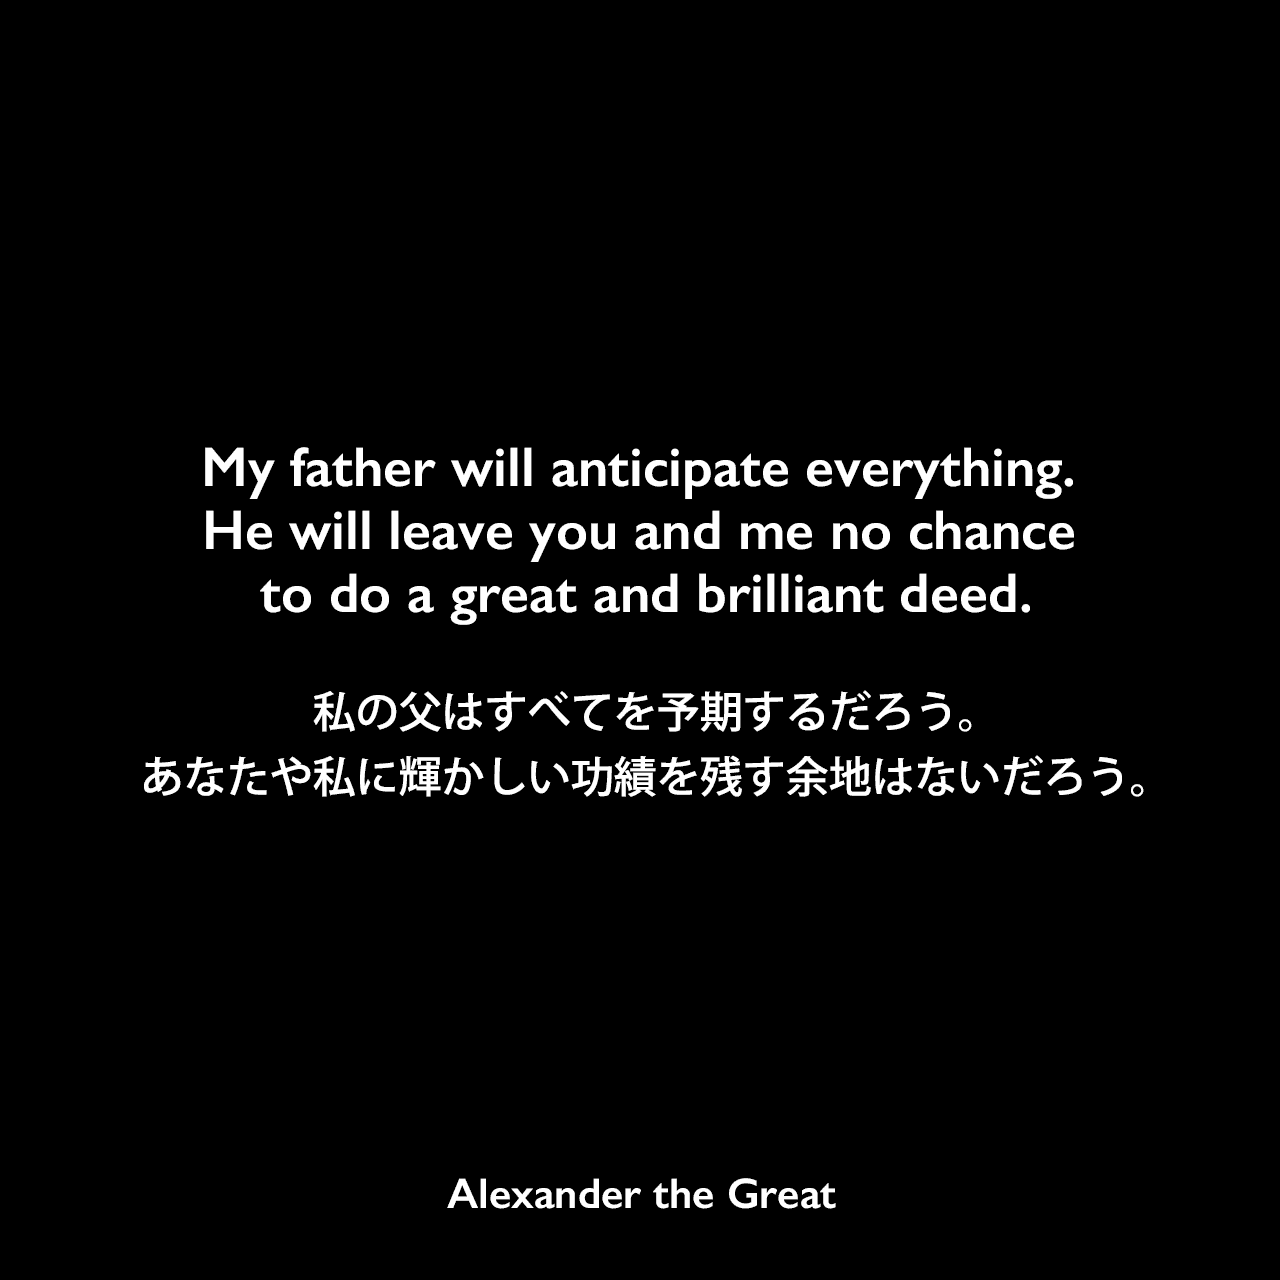 My father will anticipate everything. He will leave you and me no chance to do a great and brilliant deed.私の父はすべてを予期するだろう。あなたや私に輝かしい功績を残す余地はないだろう。Alexander the Great